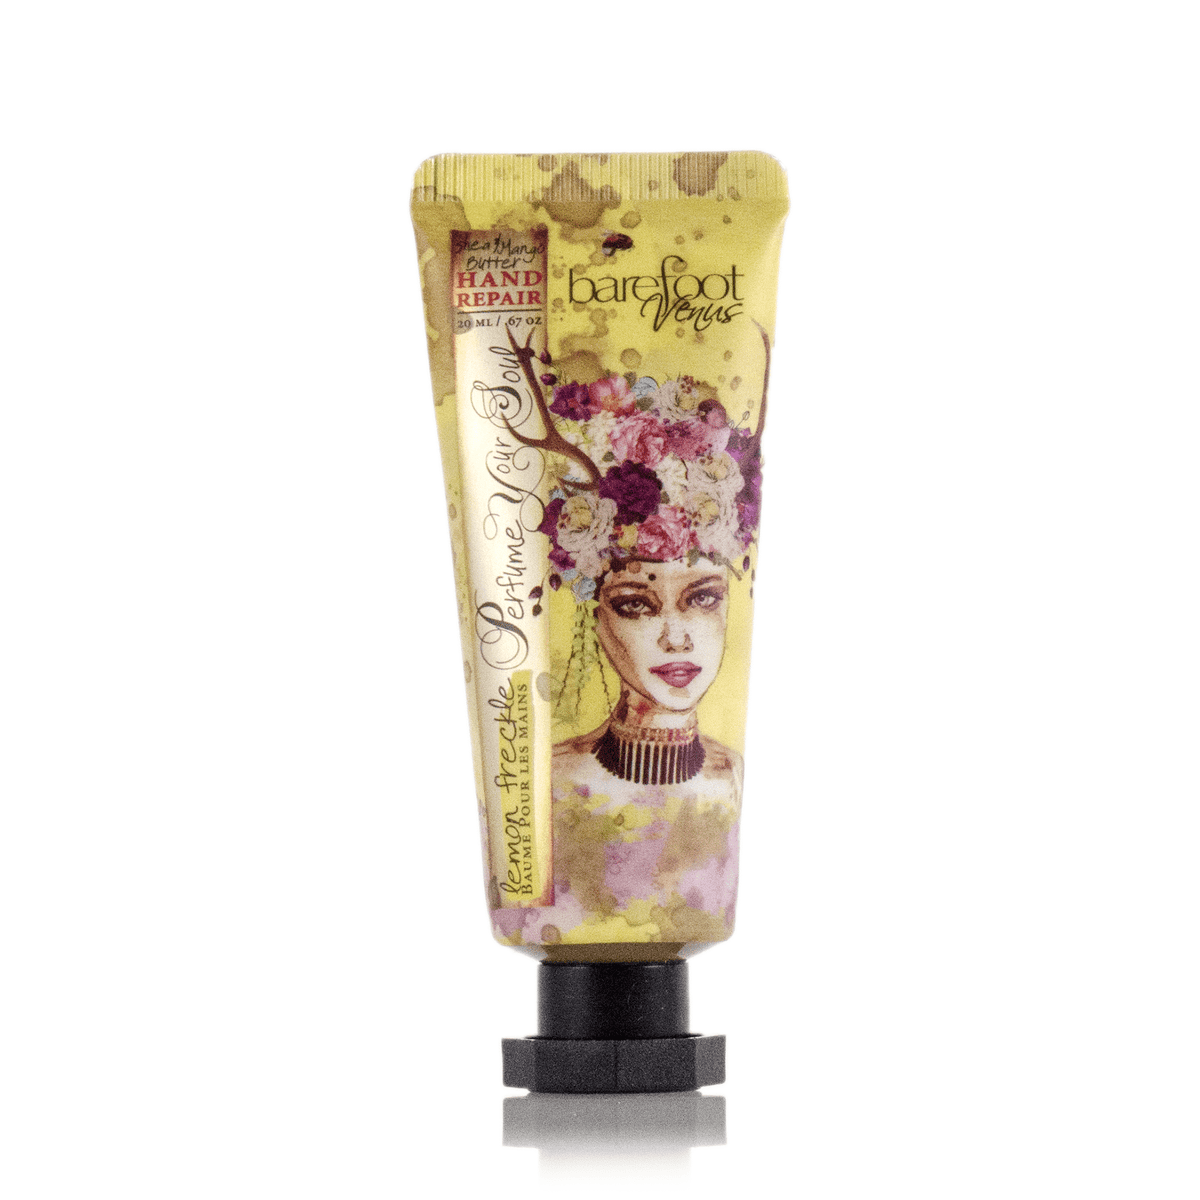 Lemon Freckle Hand Repair ON-THE-GO. INTENSELY HYDRATING. Barefoot Venus